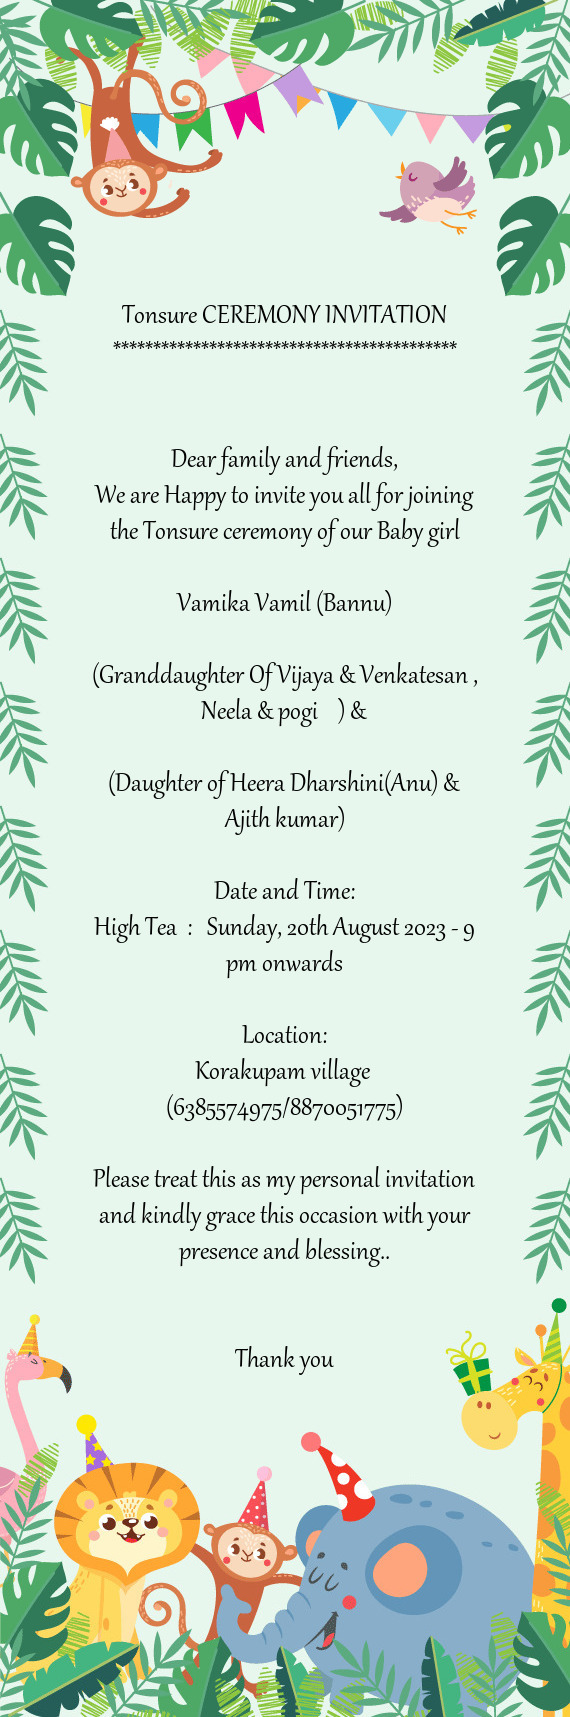 We are Happy to invite you all for joining the Tonsure ceremony of our Baby girl